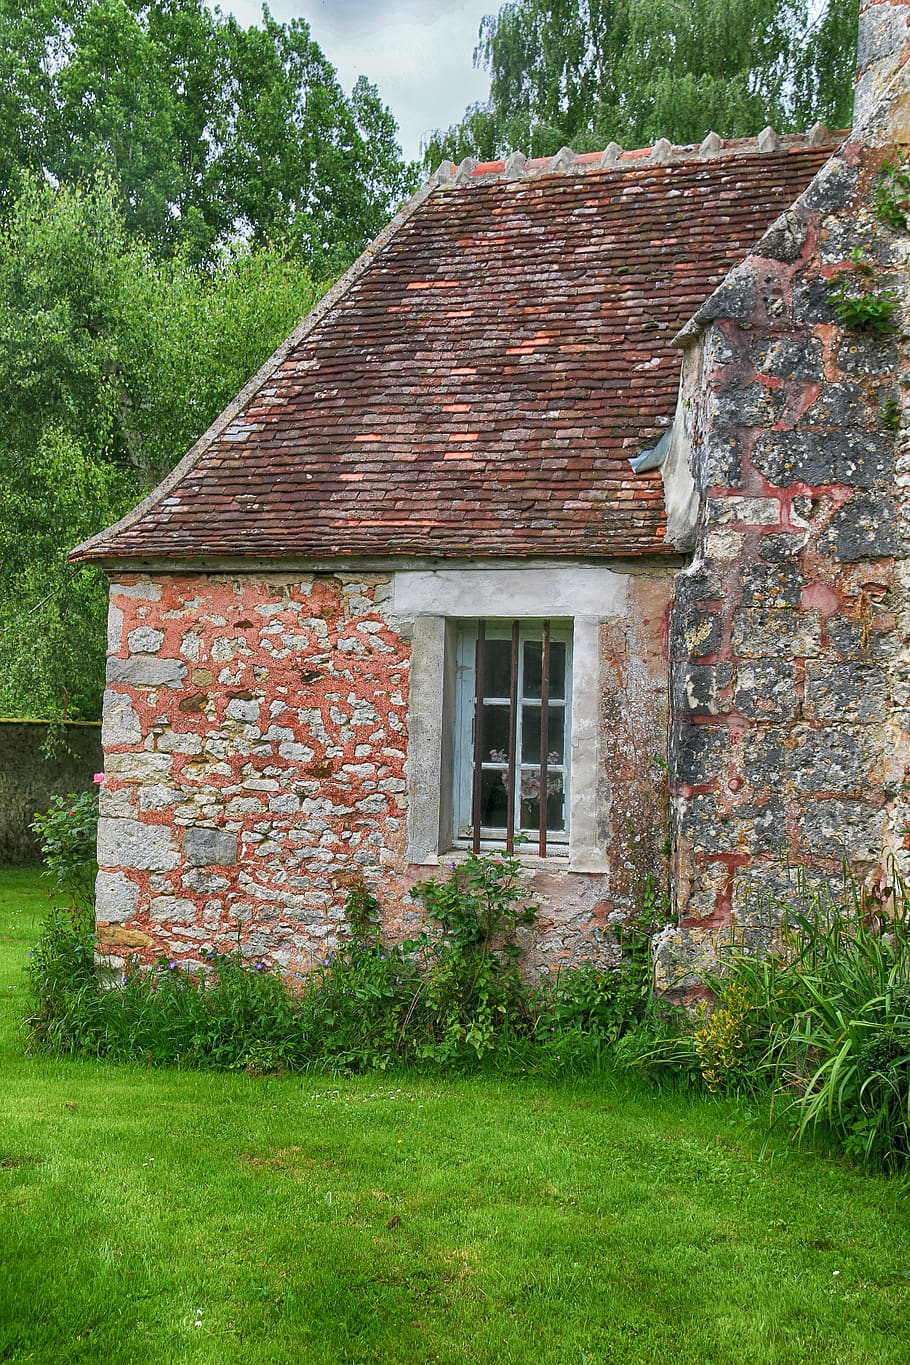 small house, house, pierre, brick, old, former, landscape, window, green, architecture